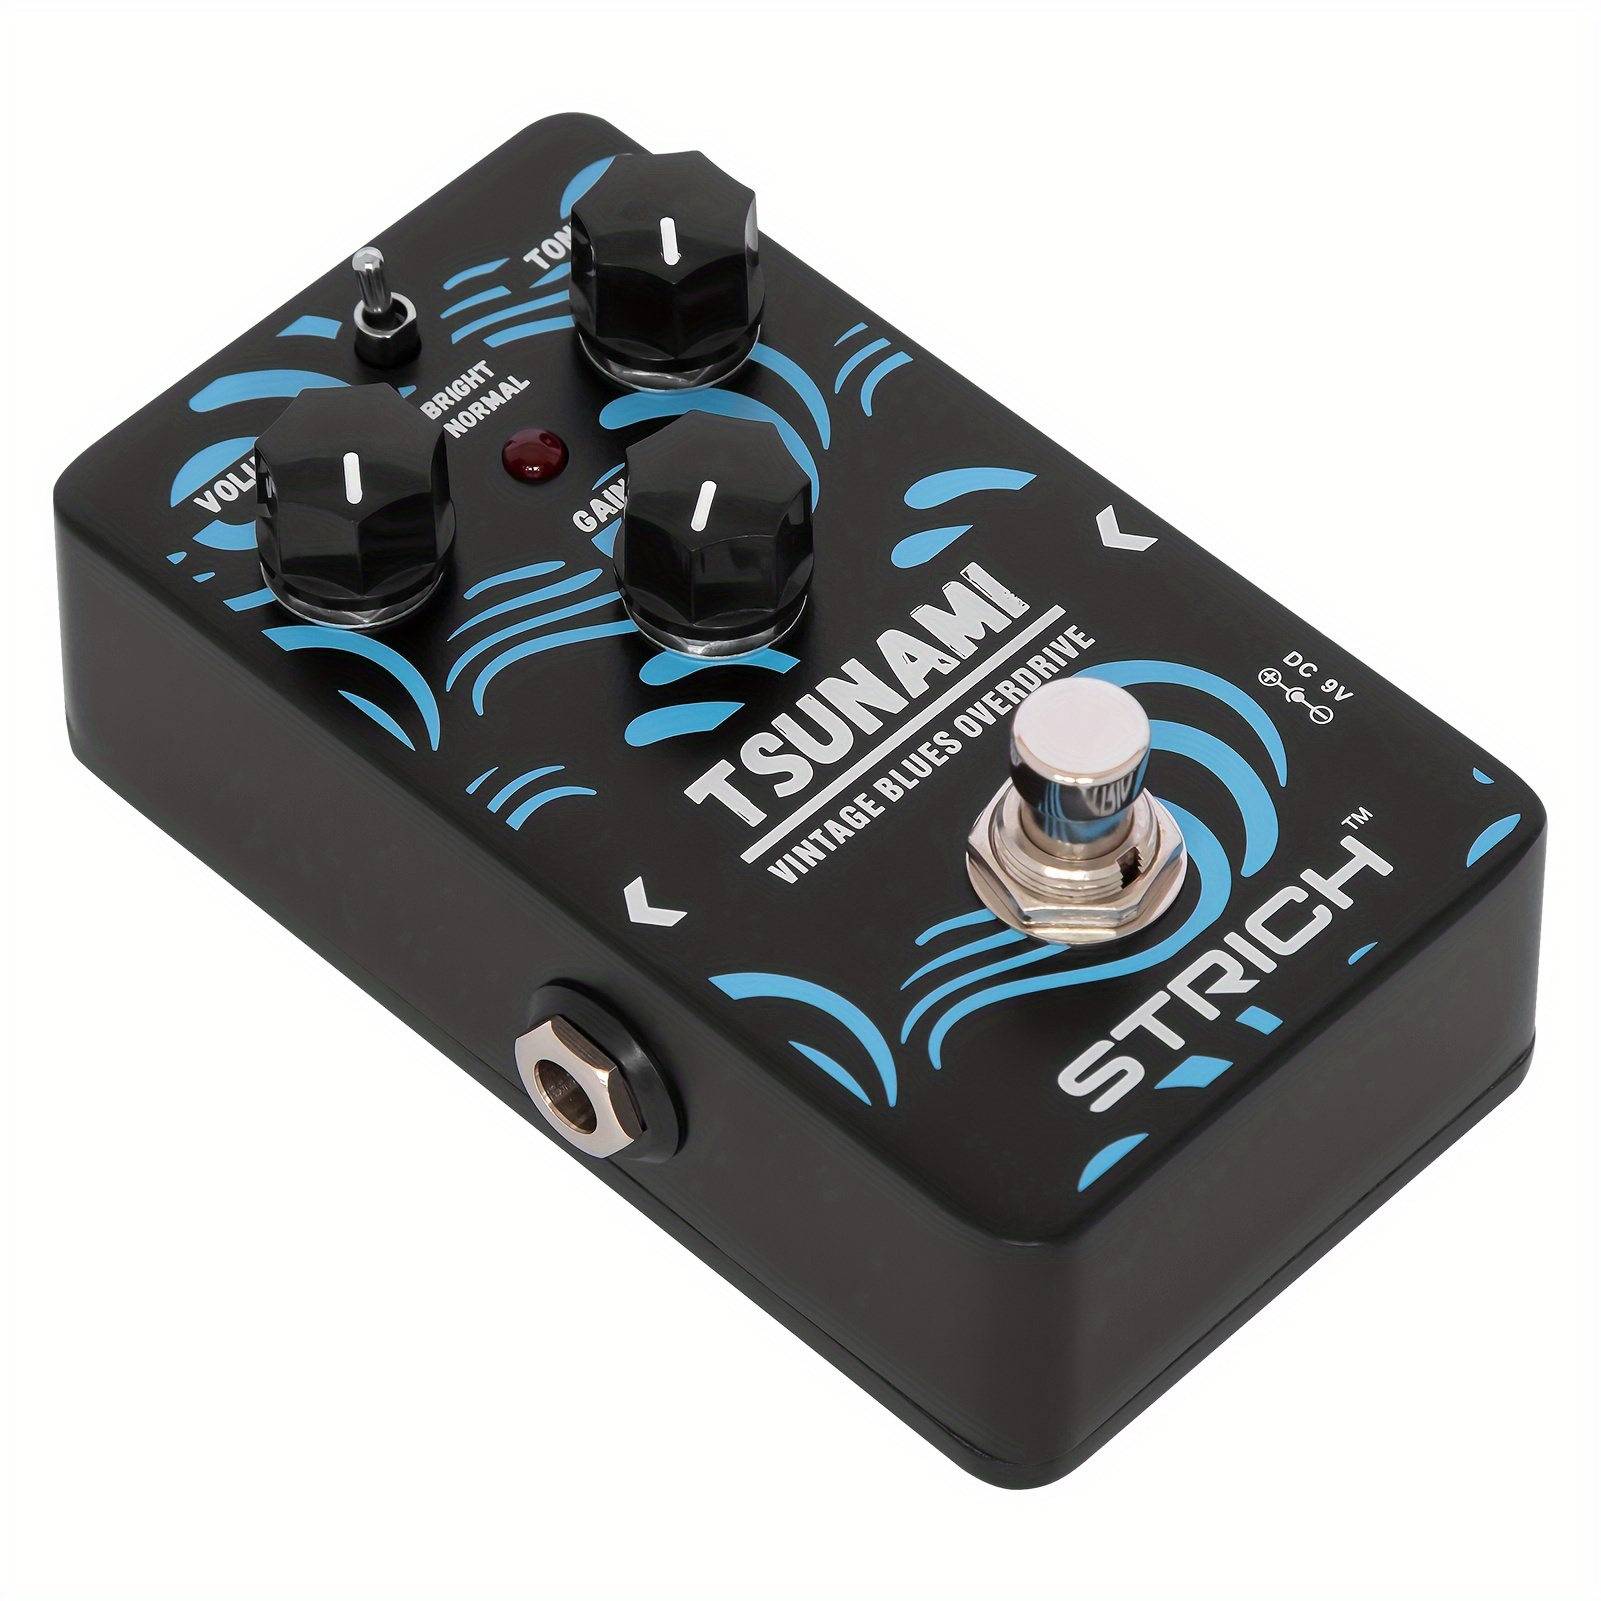 

Strich Tsunami Overdrive Guitar Pedal, Blues Drive Vintage Overdrive Warm/hot Modes, True Bypass For Electric Guitar, Black